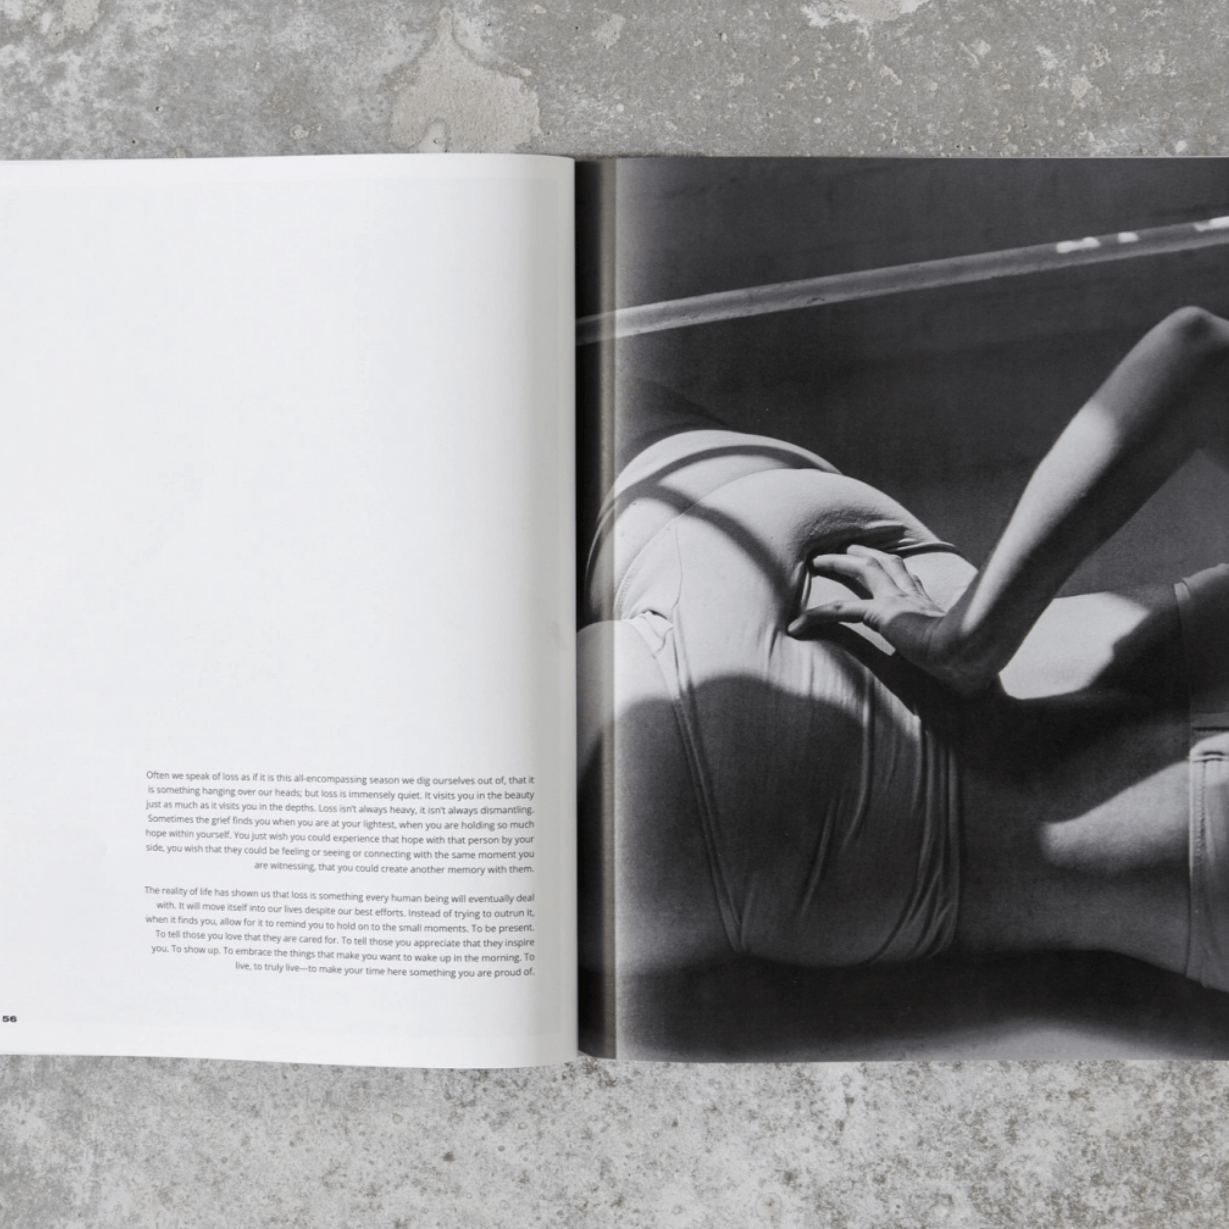 Emotional Aesthetics - photography book by Thought Catalog